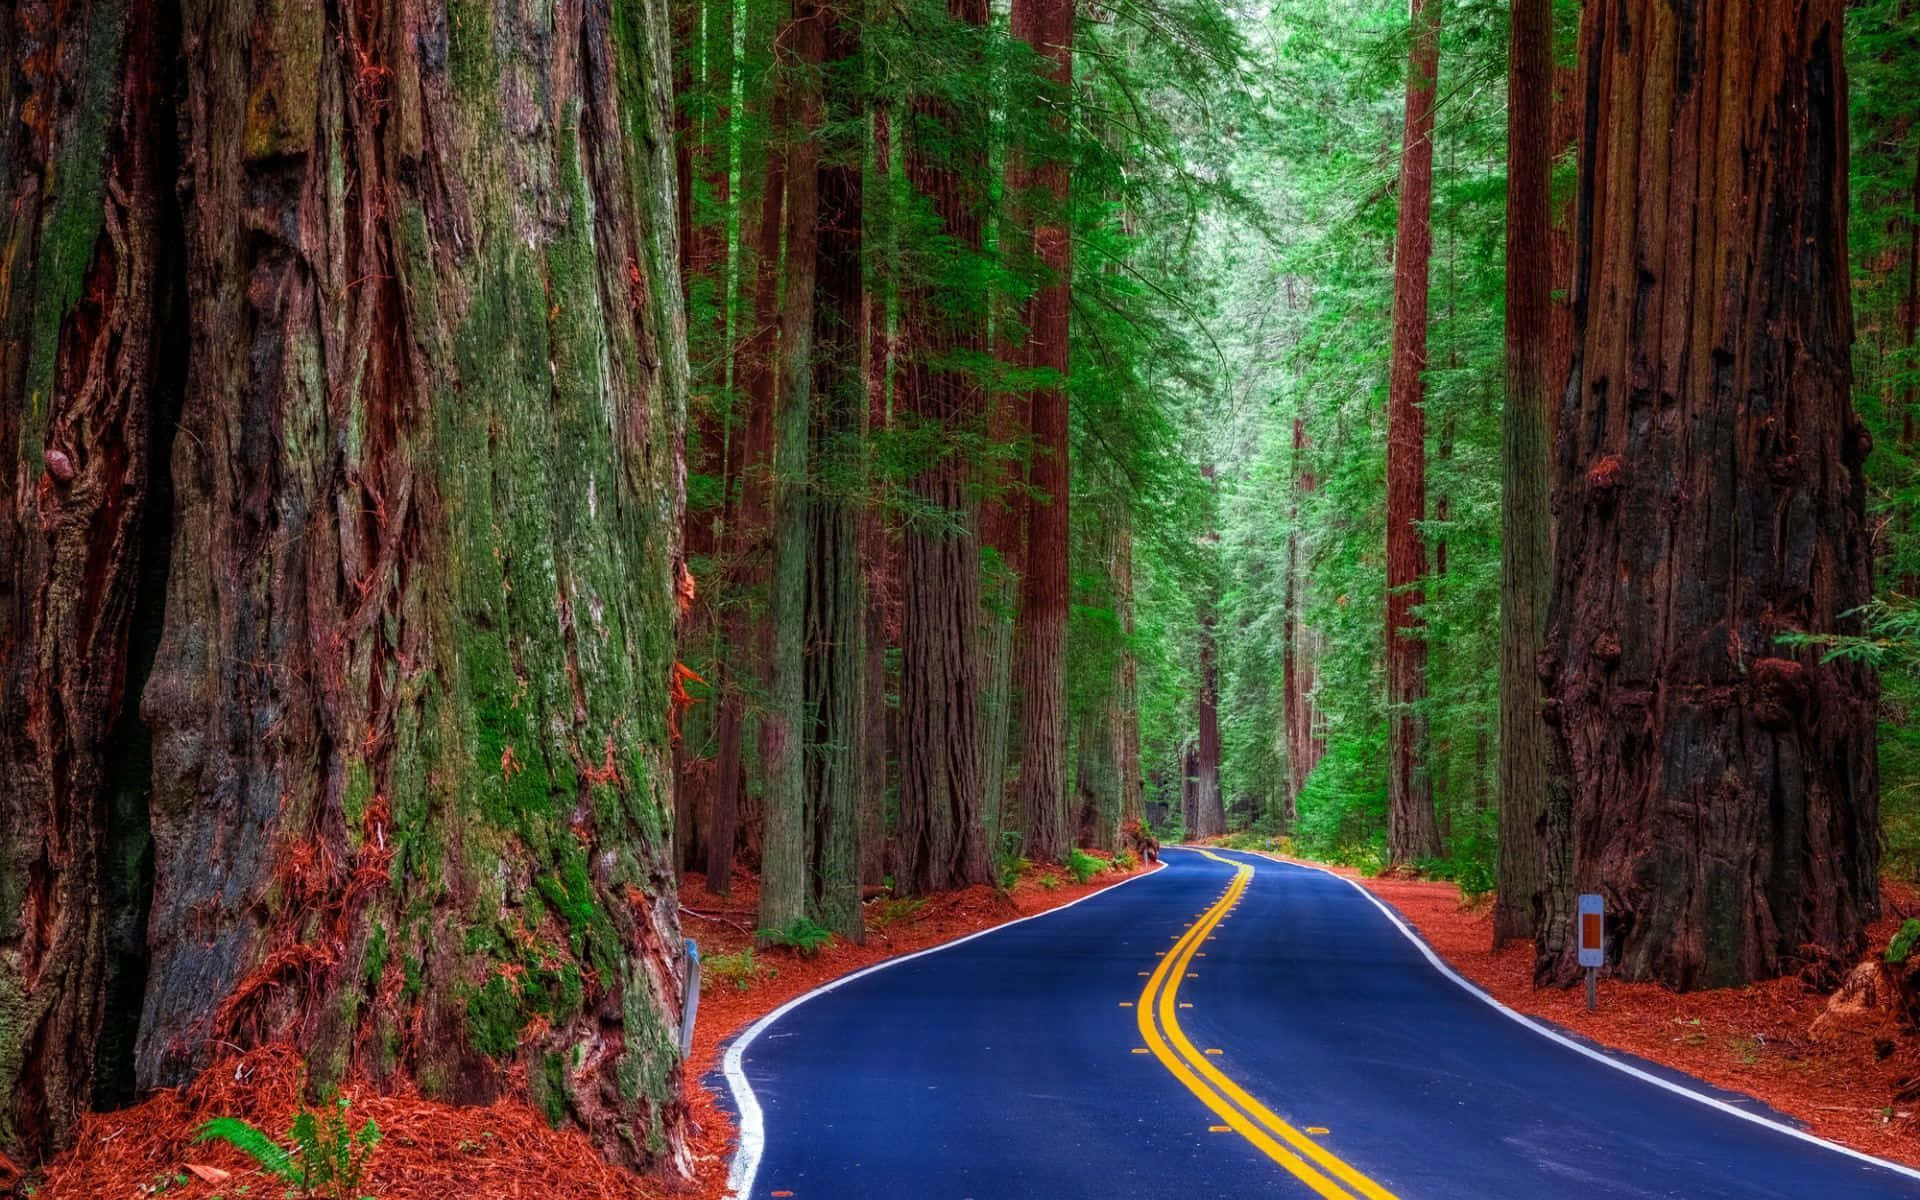 Redwood Trees in the California Forest